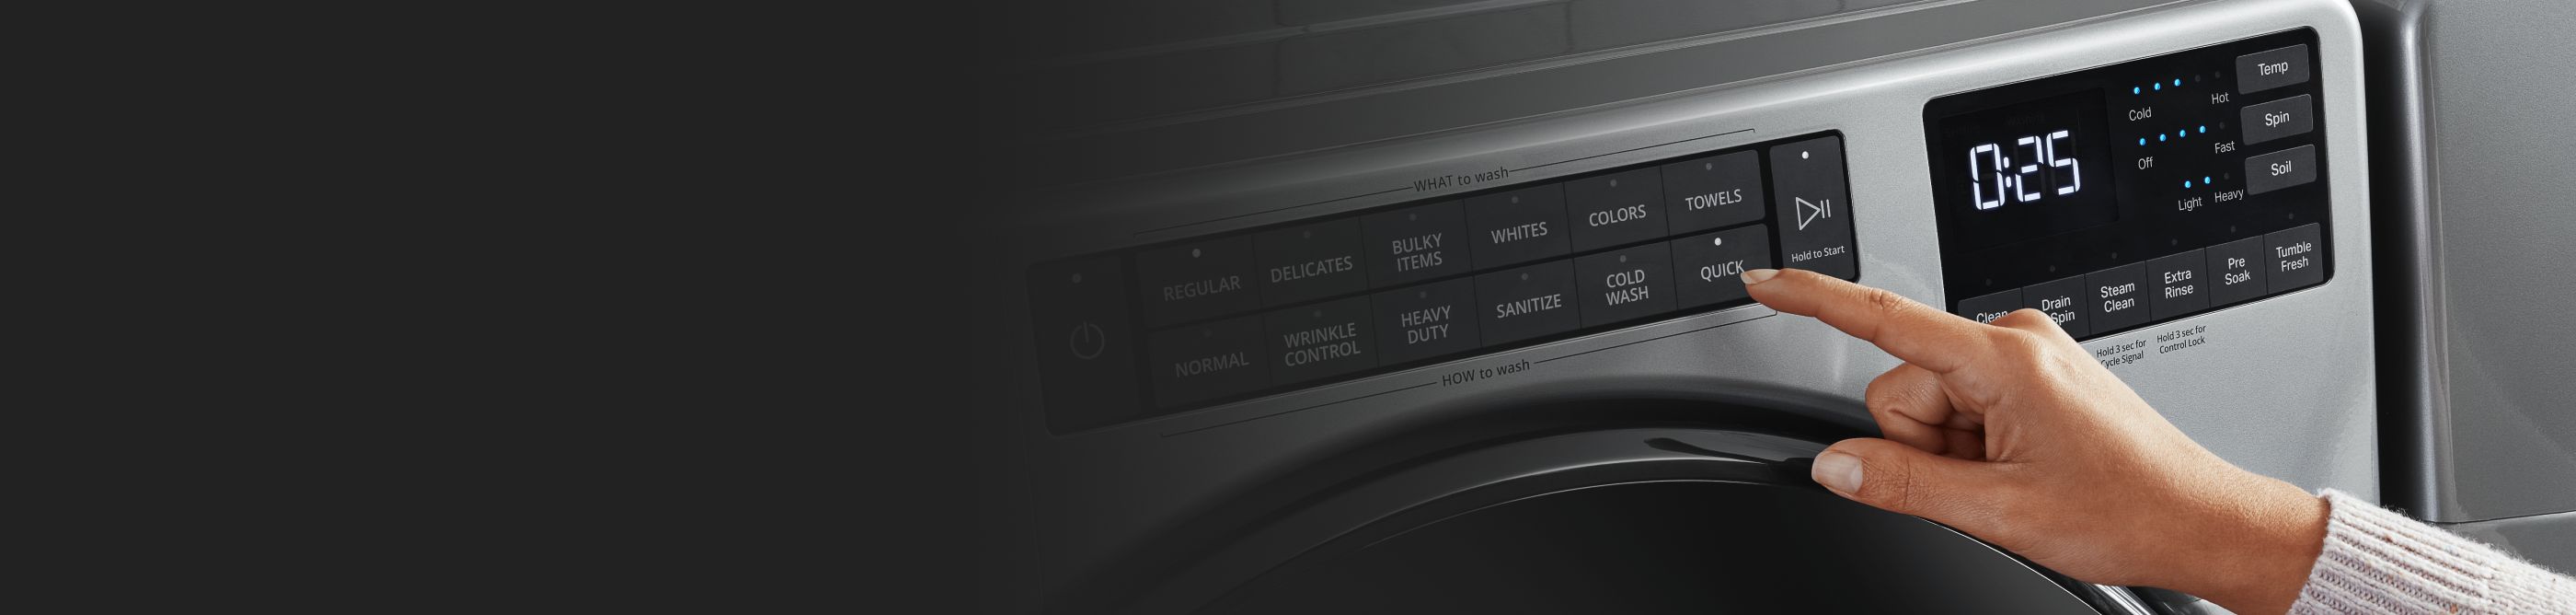 Pressing a button on a washer